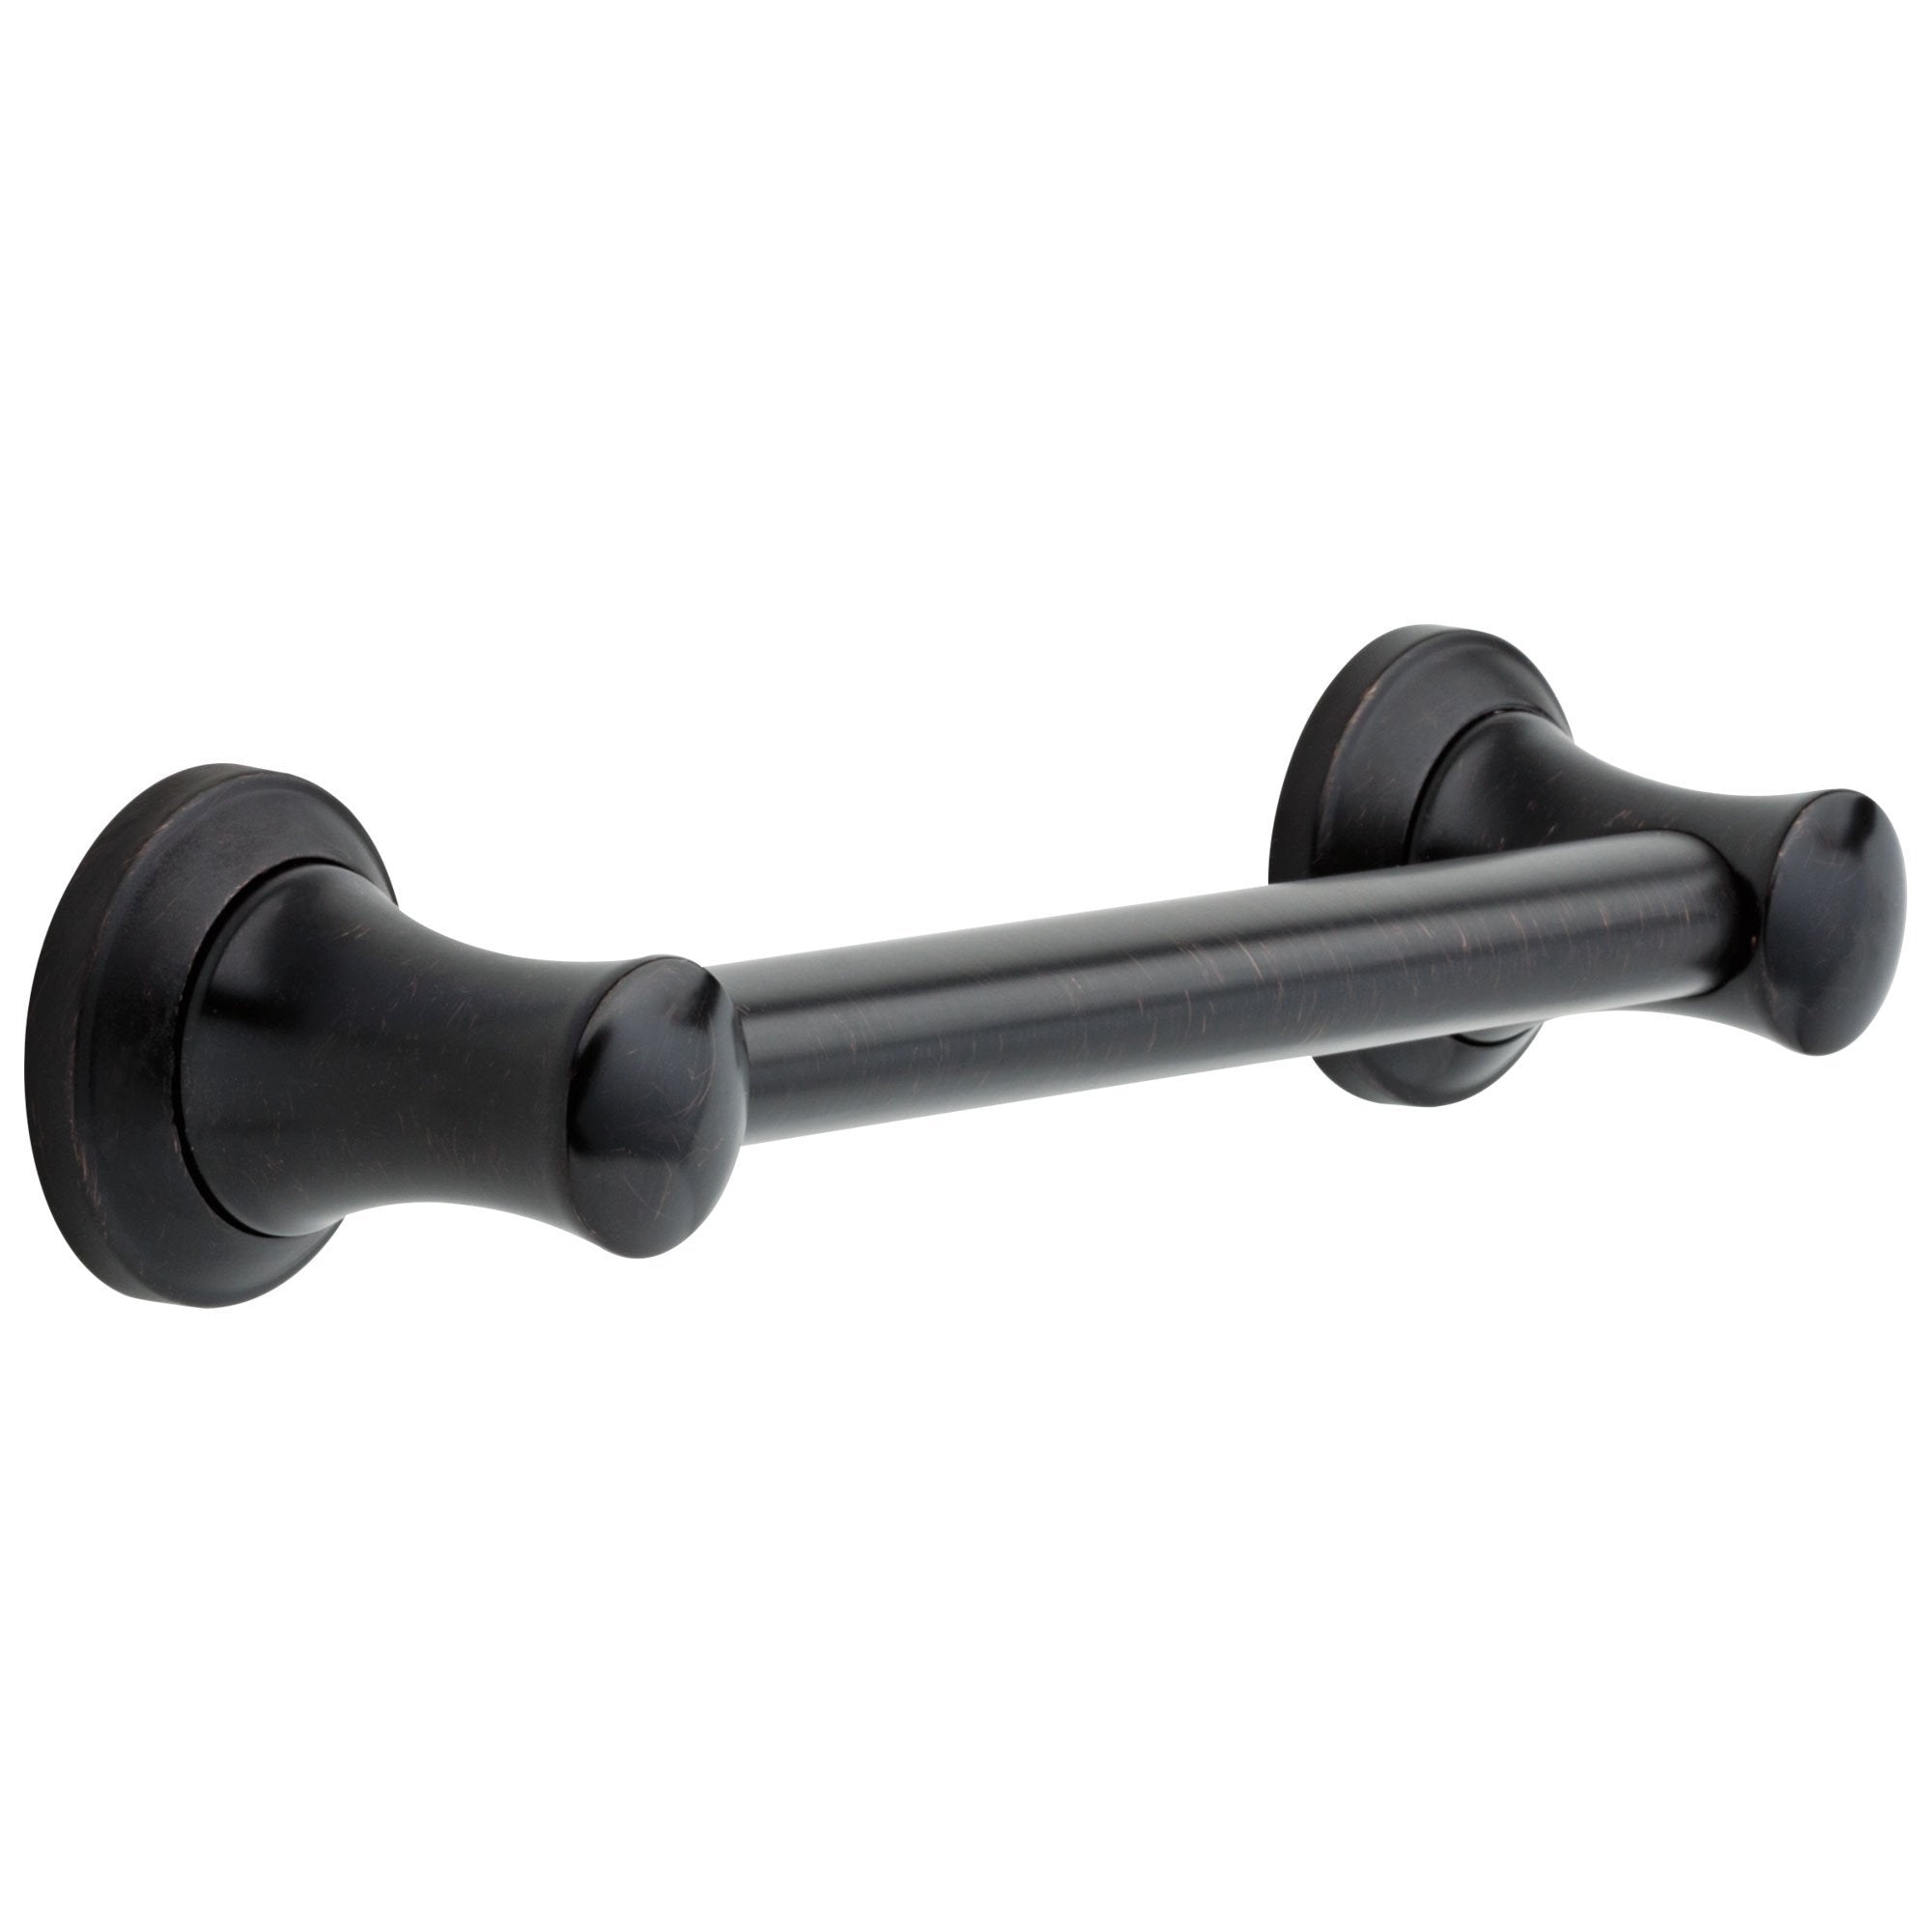 Delta Bath Safety Collection Venetian Bronze Finish Transitional Style Decorative ADA Approved 12-inch Short Grab Bar for Bathroom or Shower D41712RB